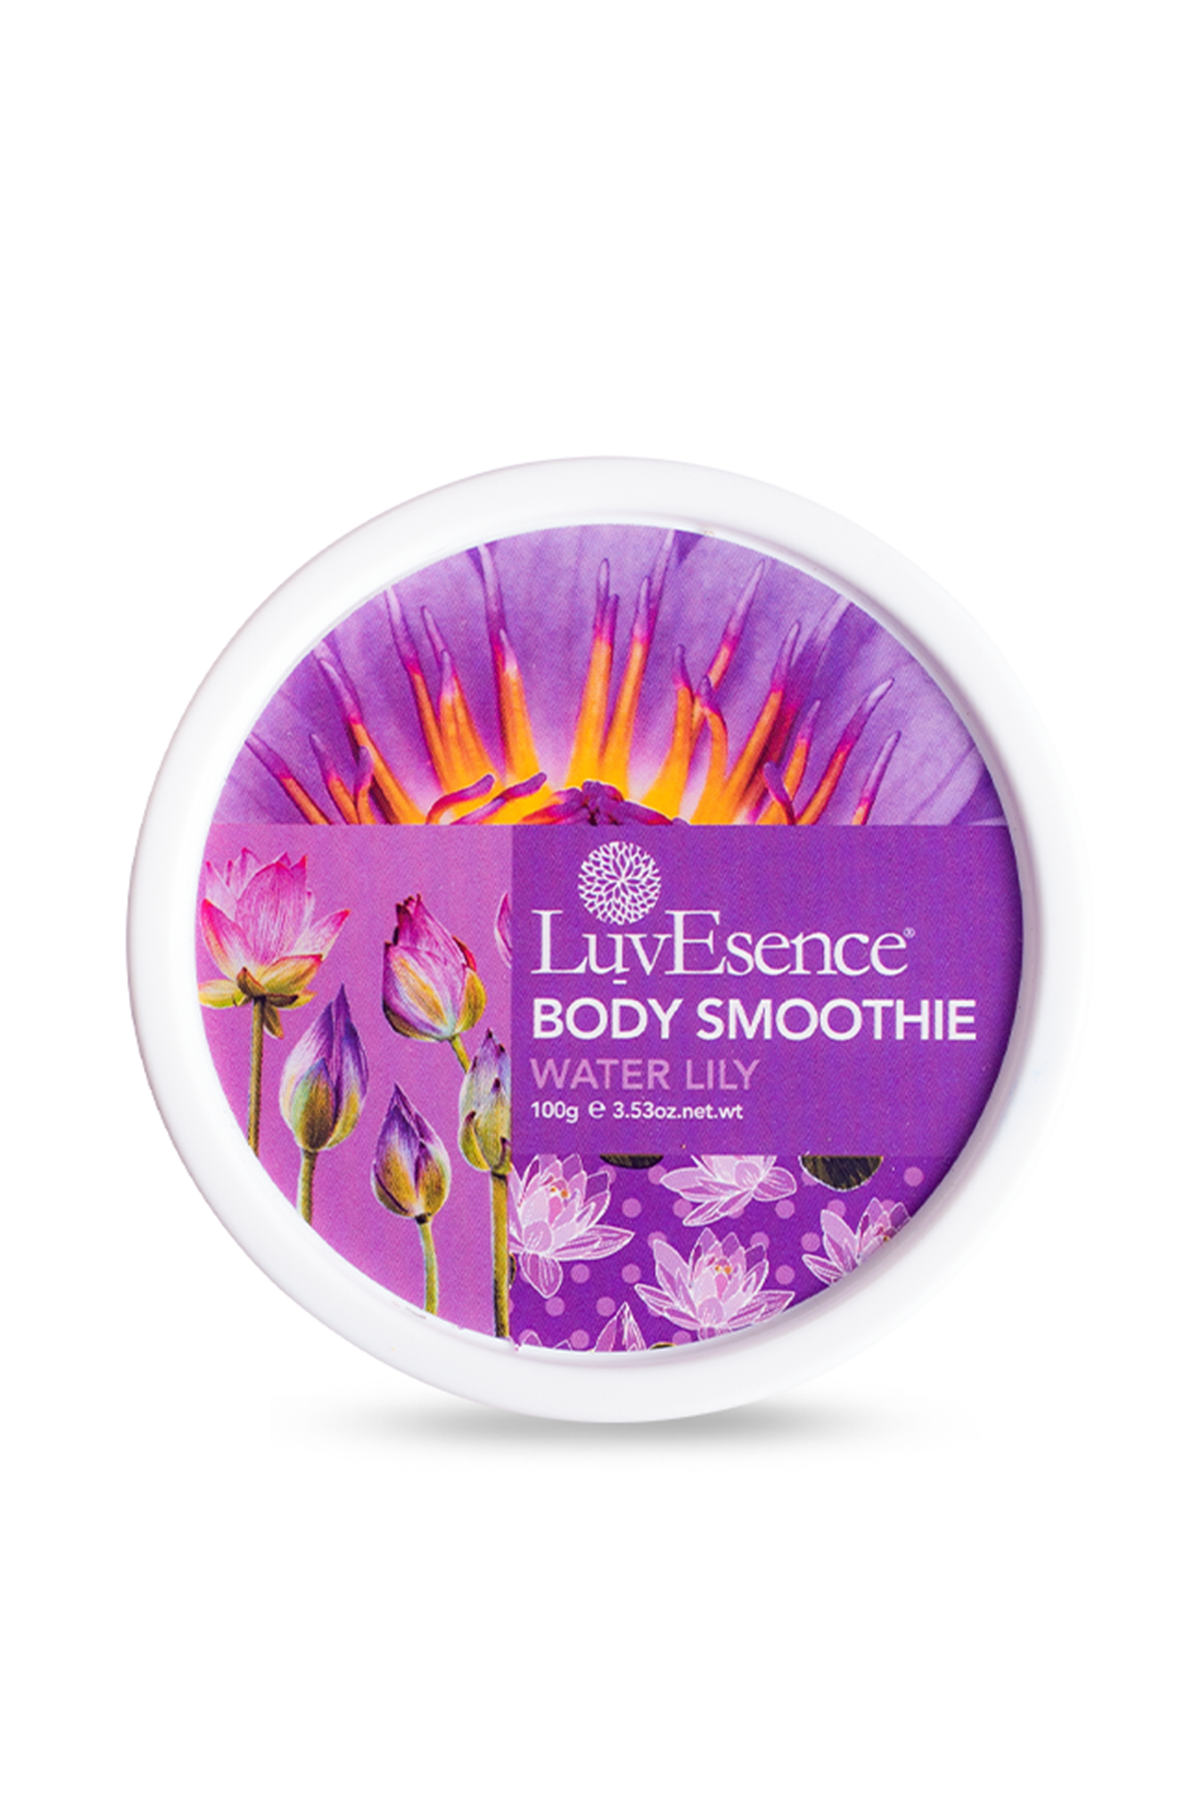 LuvEsence Women's Waterlily Body Smoothie